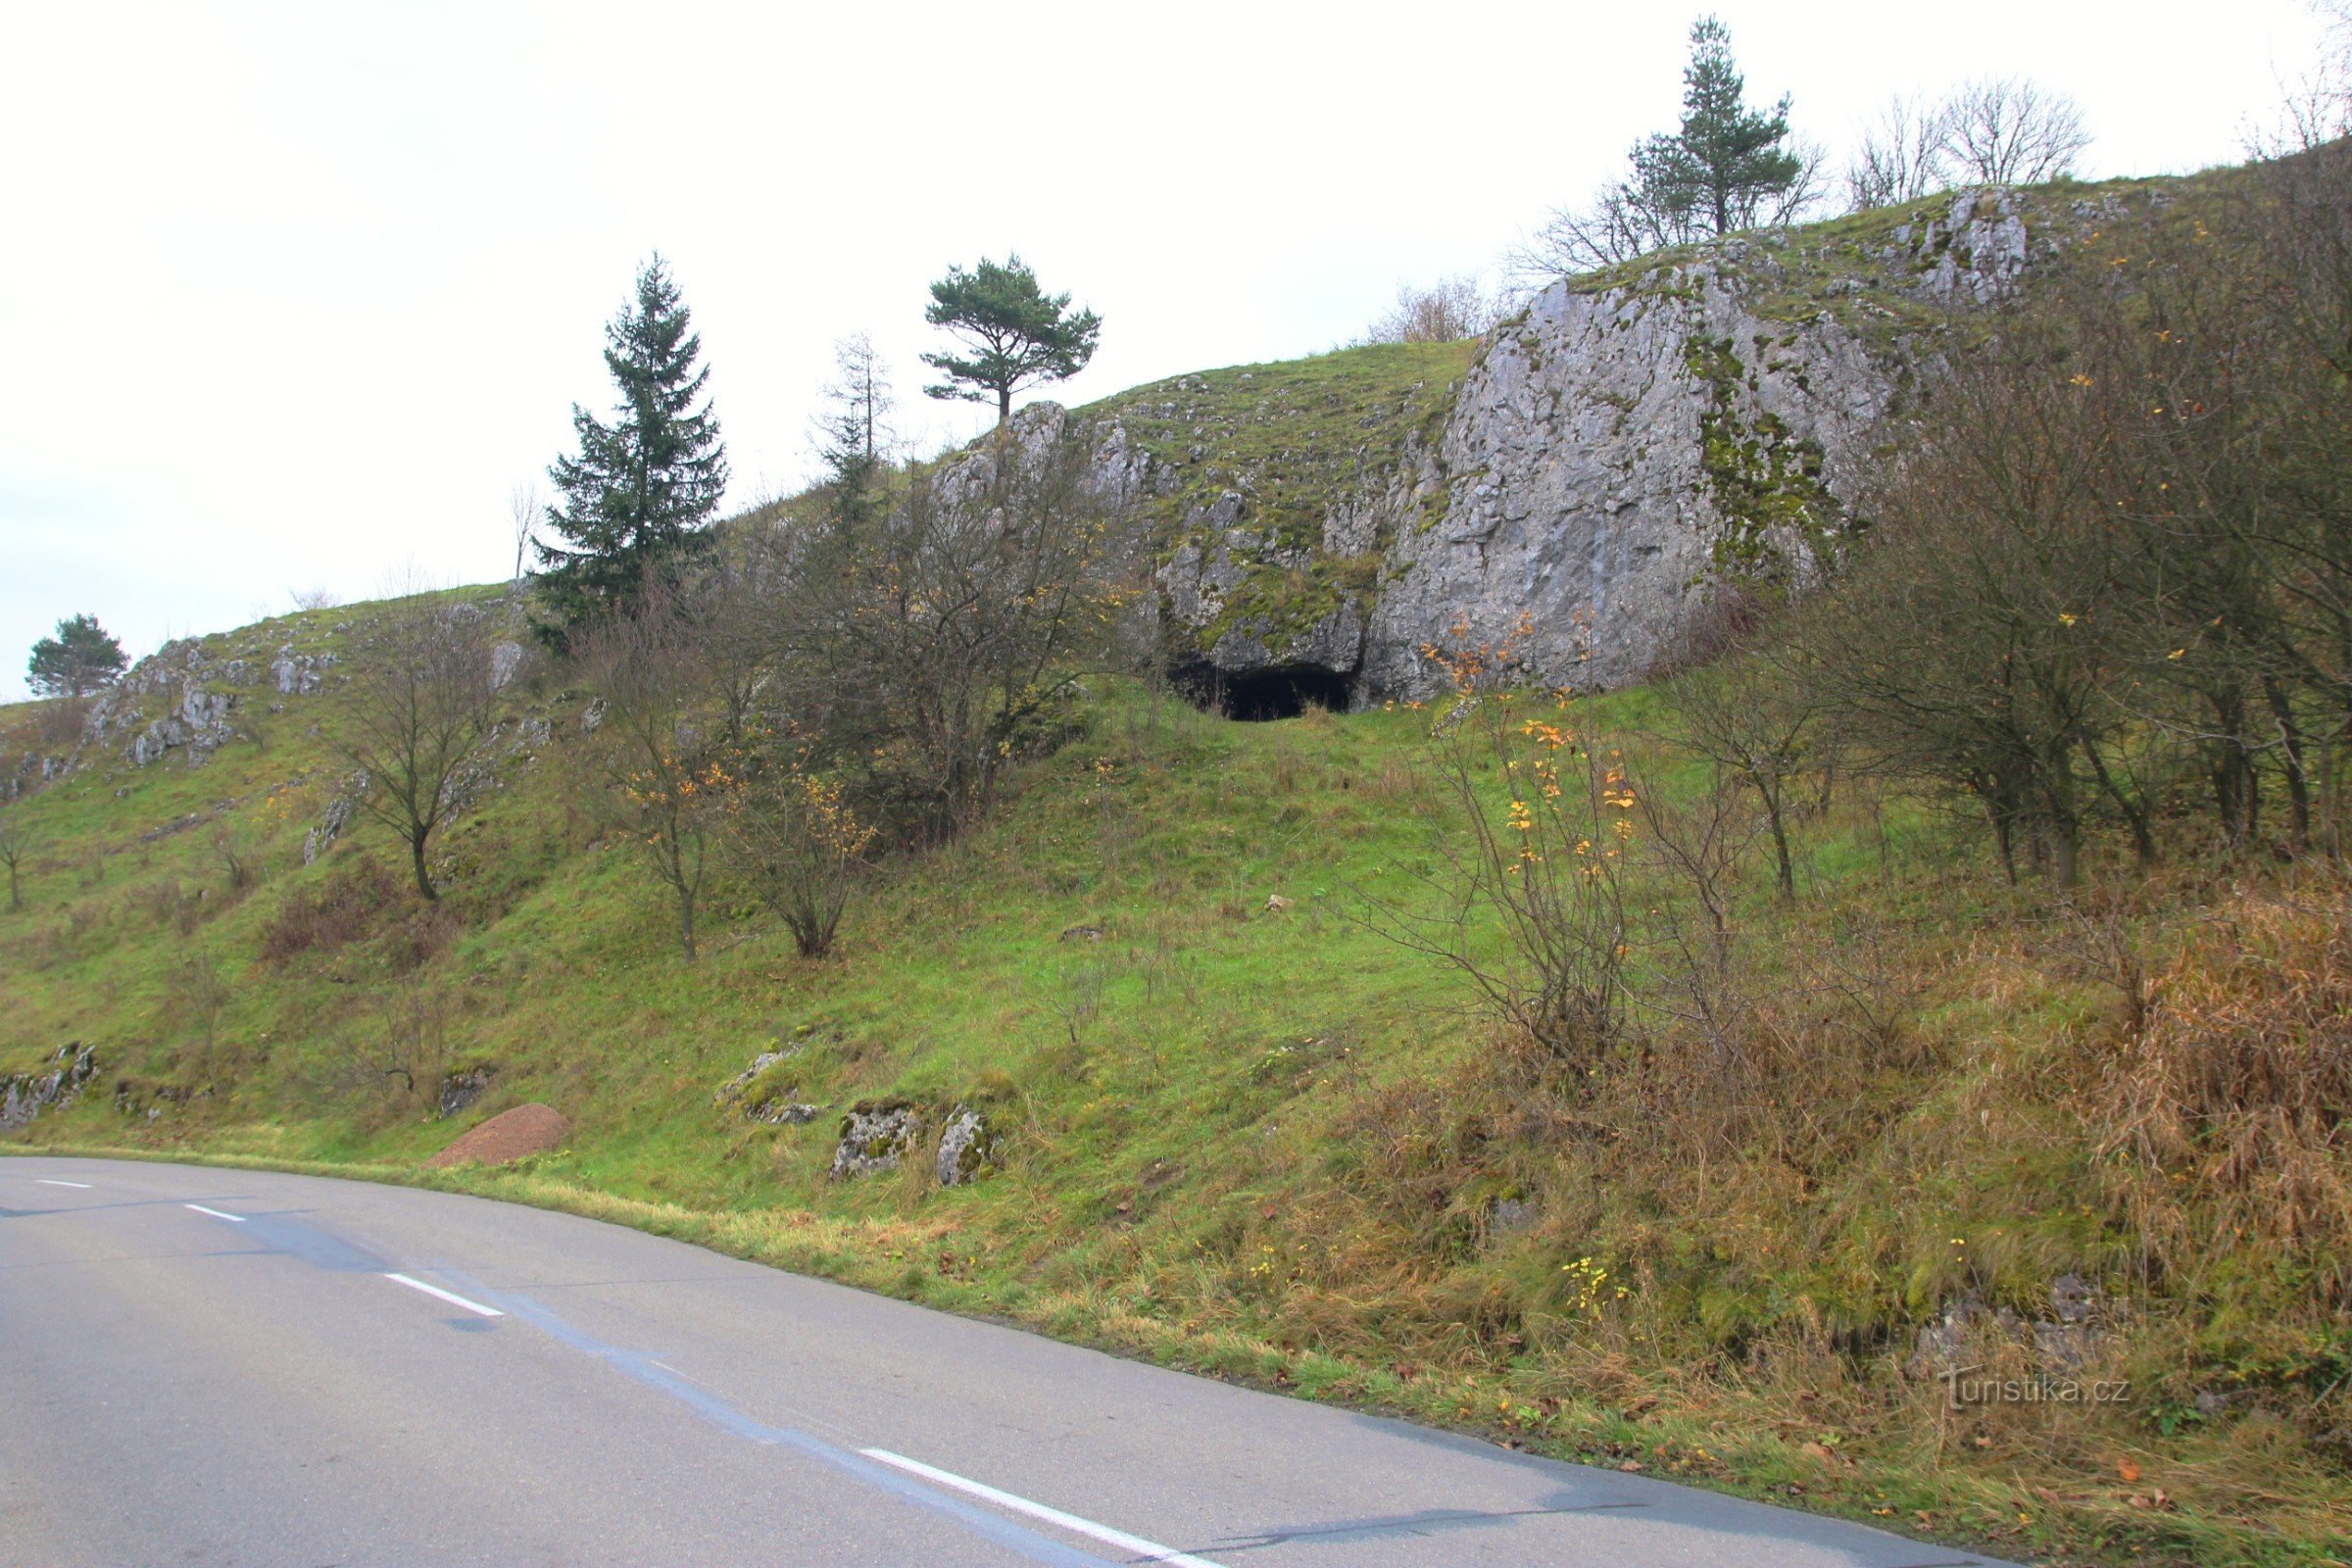 The cave entrance is easily visible from the road